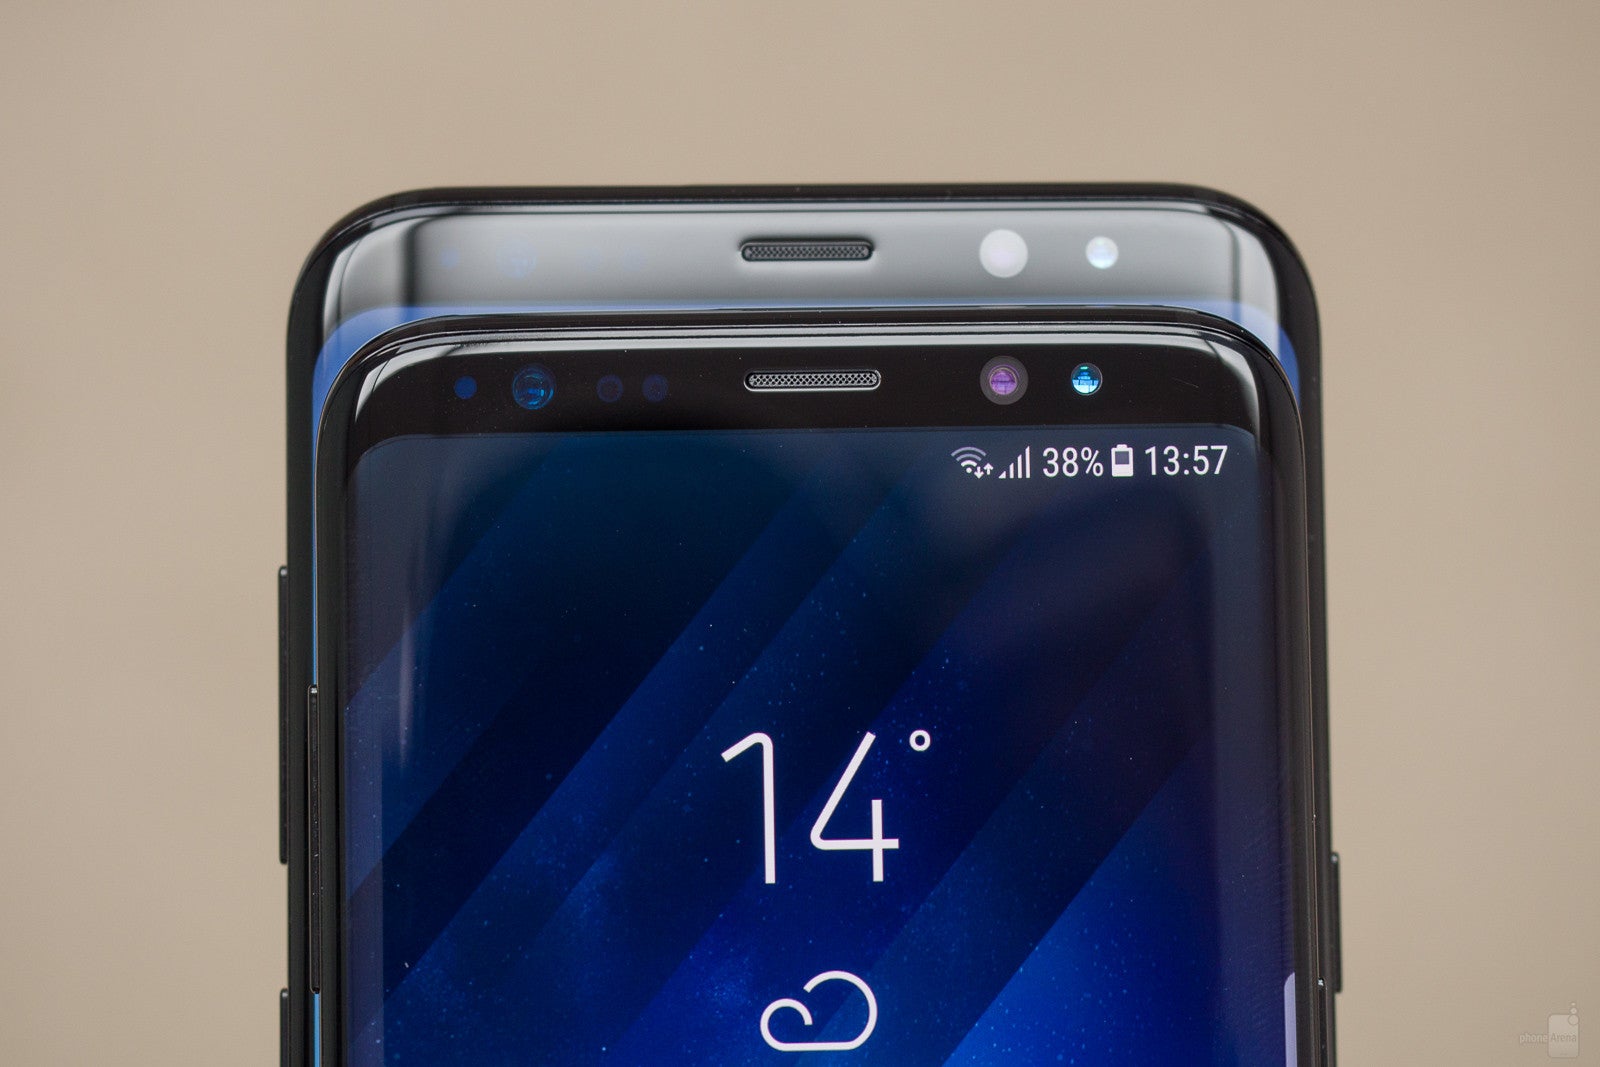 PhoneArena authors' personal thoughts on the Samsung Galaxy S8 and S8+